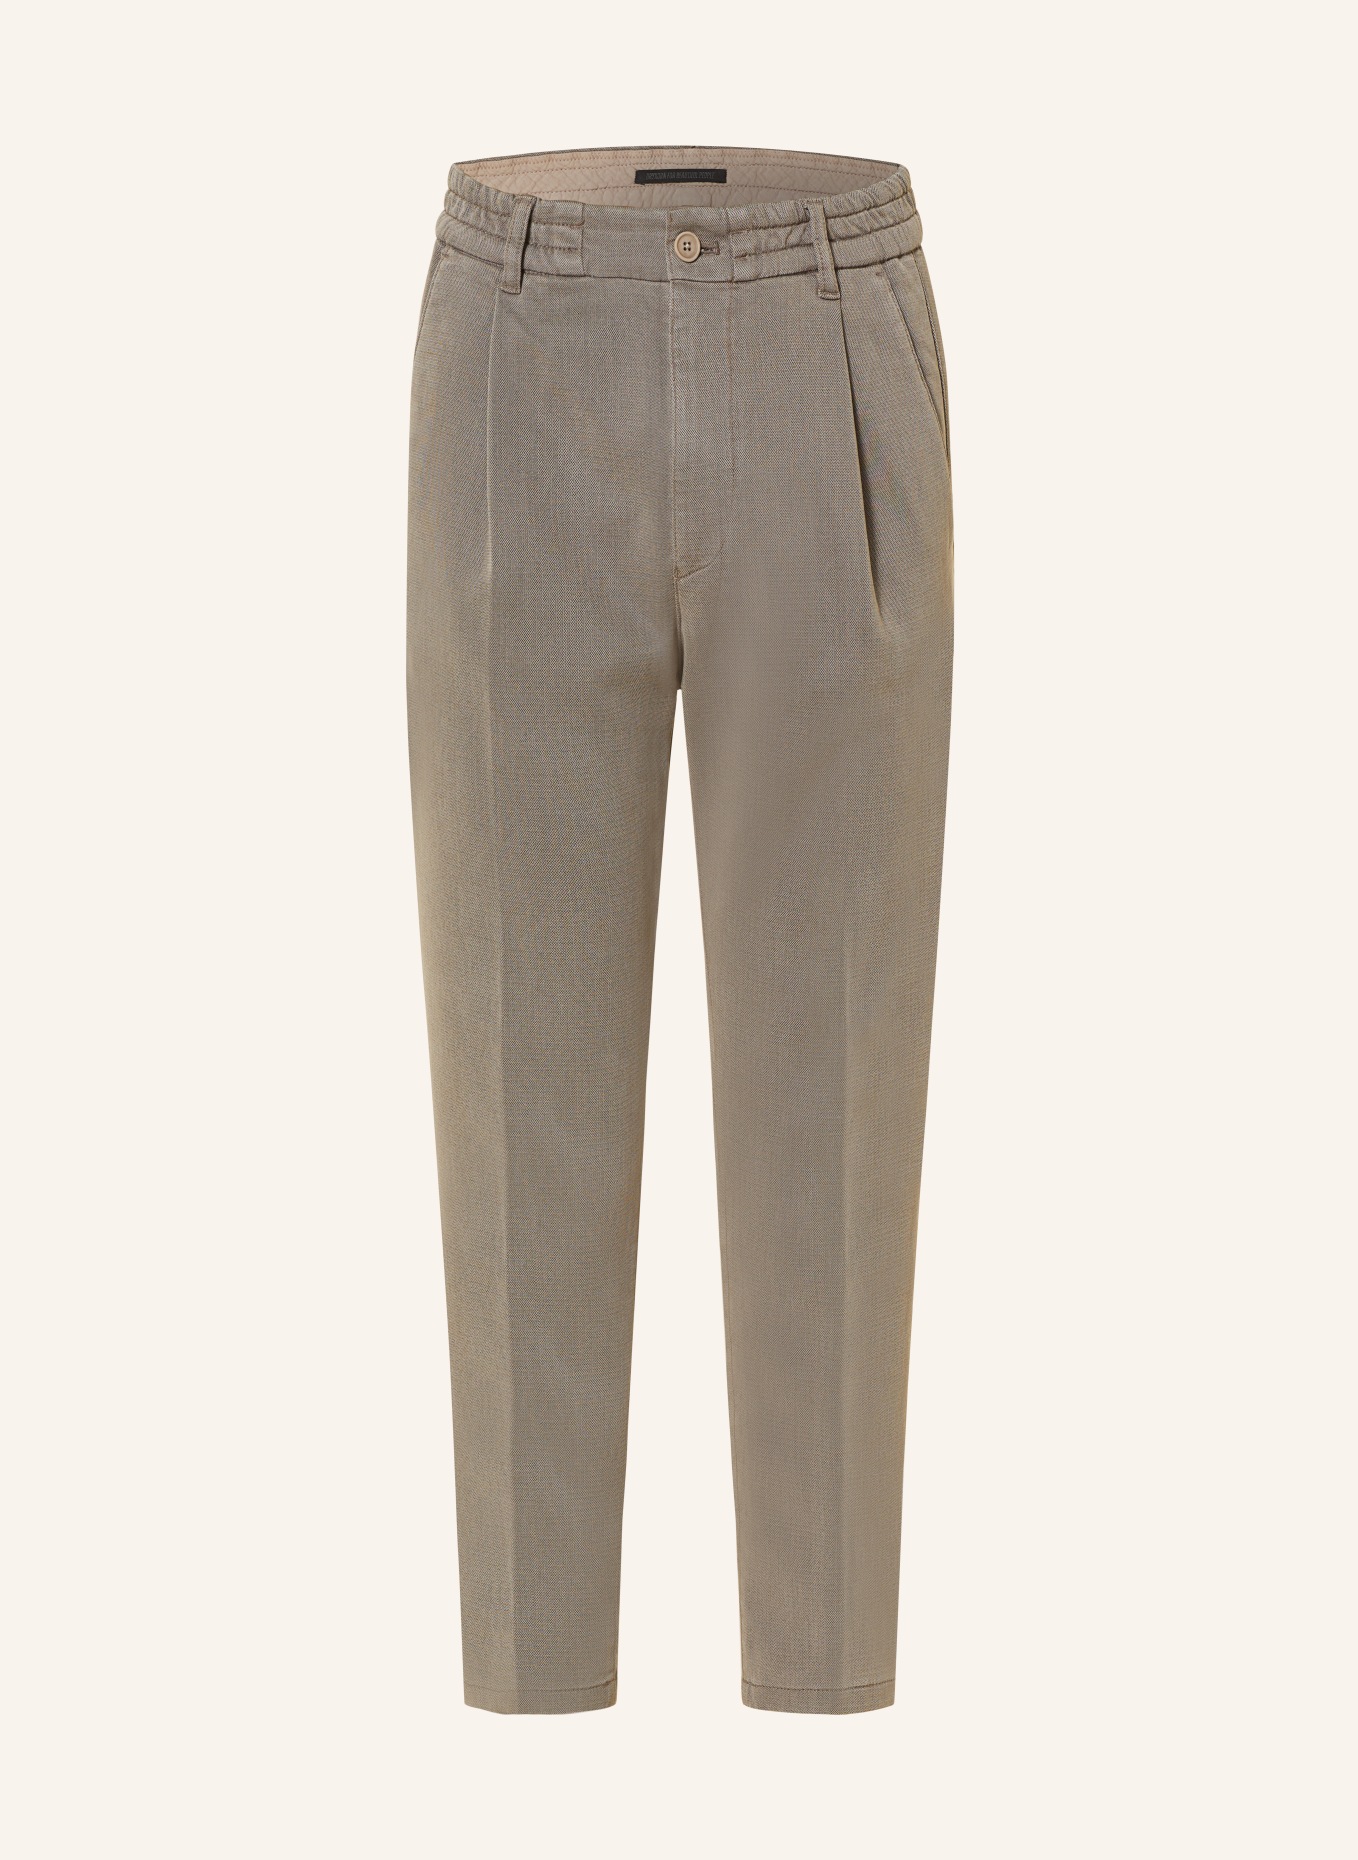 DRYKORN Chino CHASY Relaxed Fit, Farbe: BRAUN (Bild 1)